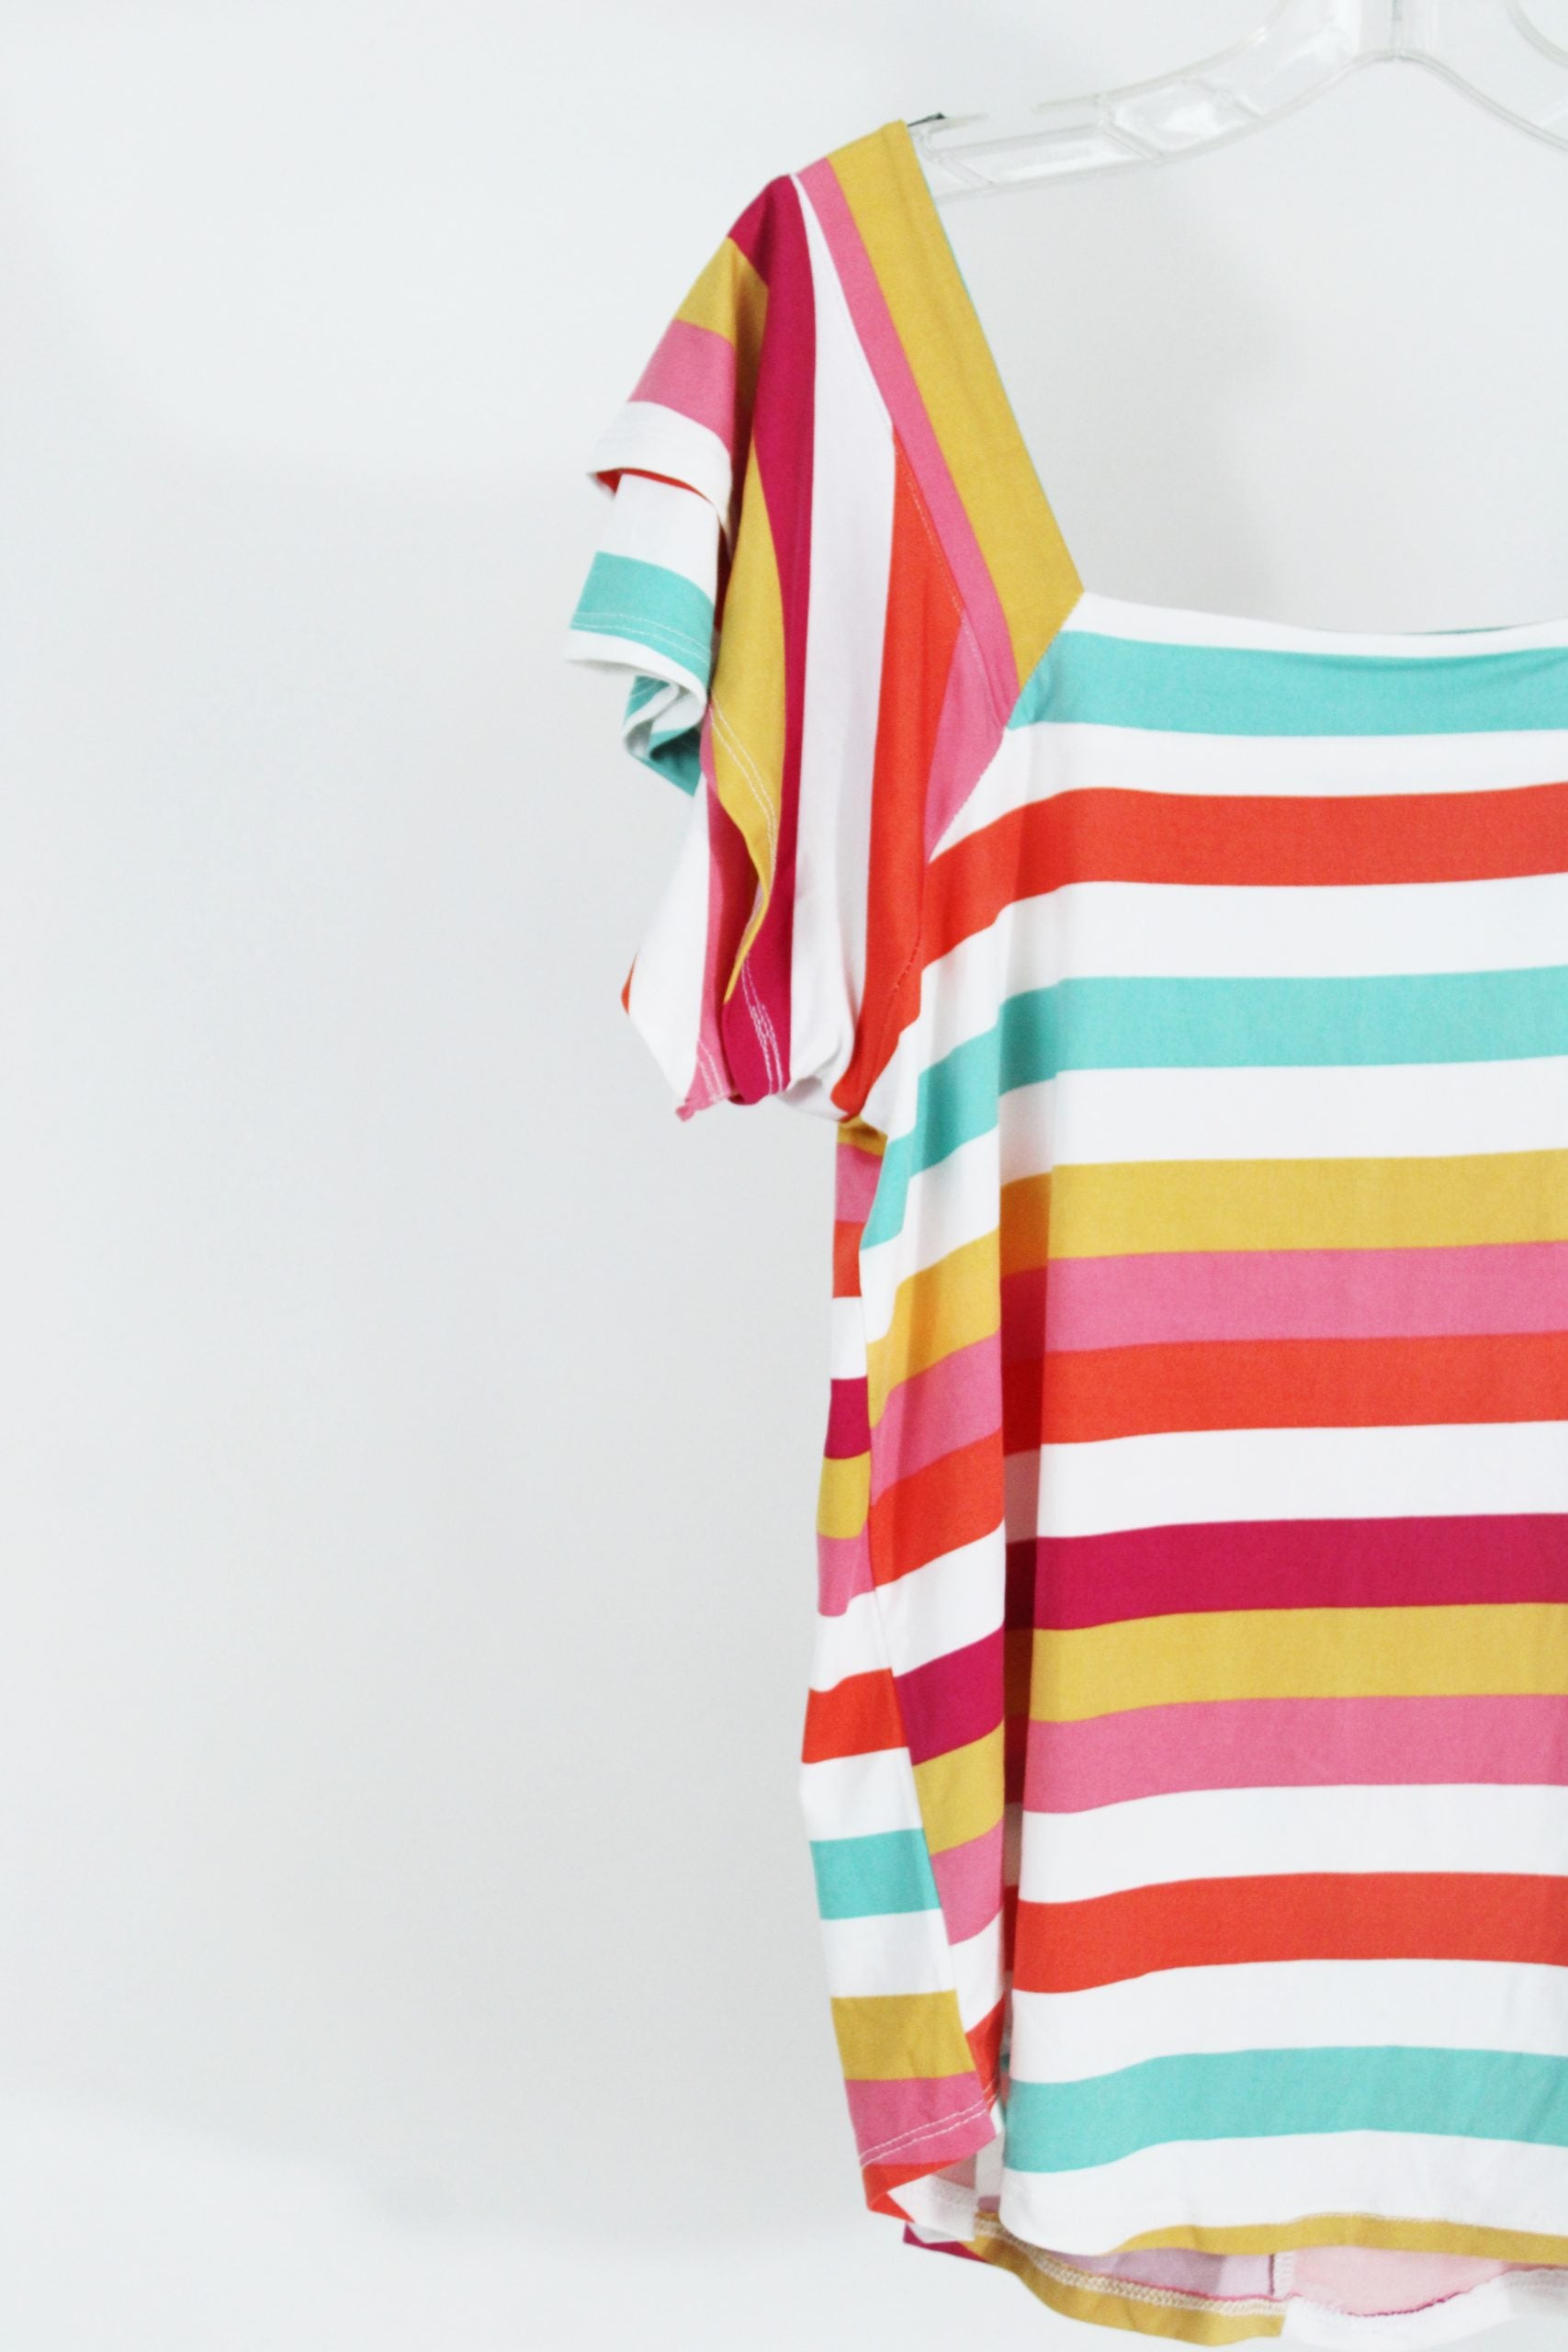 Harlow & Rose Colorful Striped Top | Size M